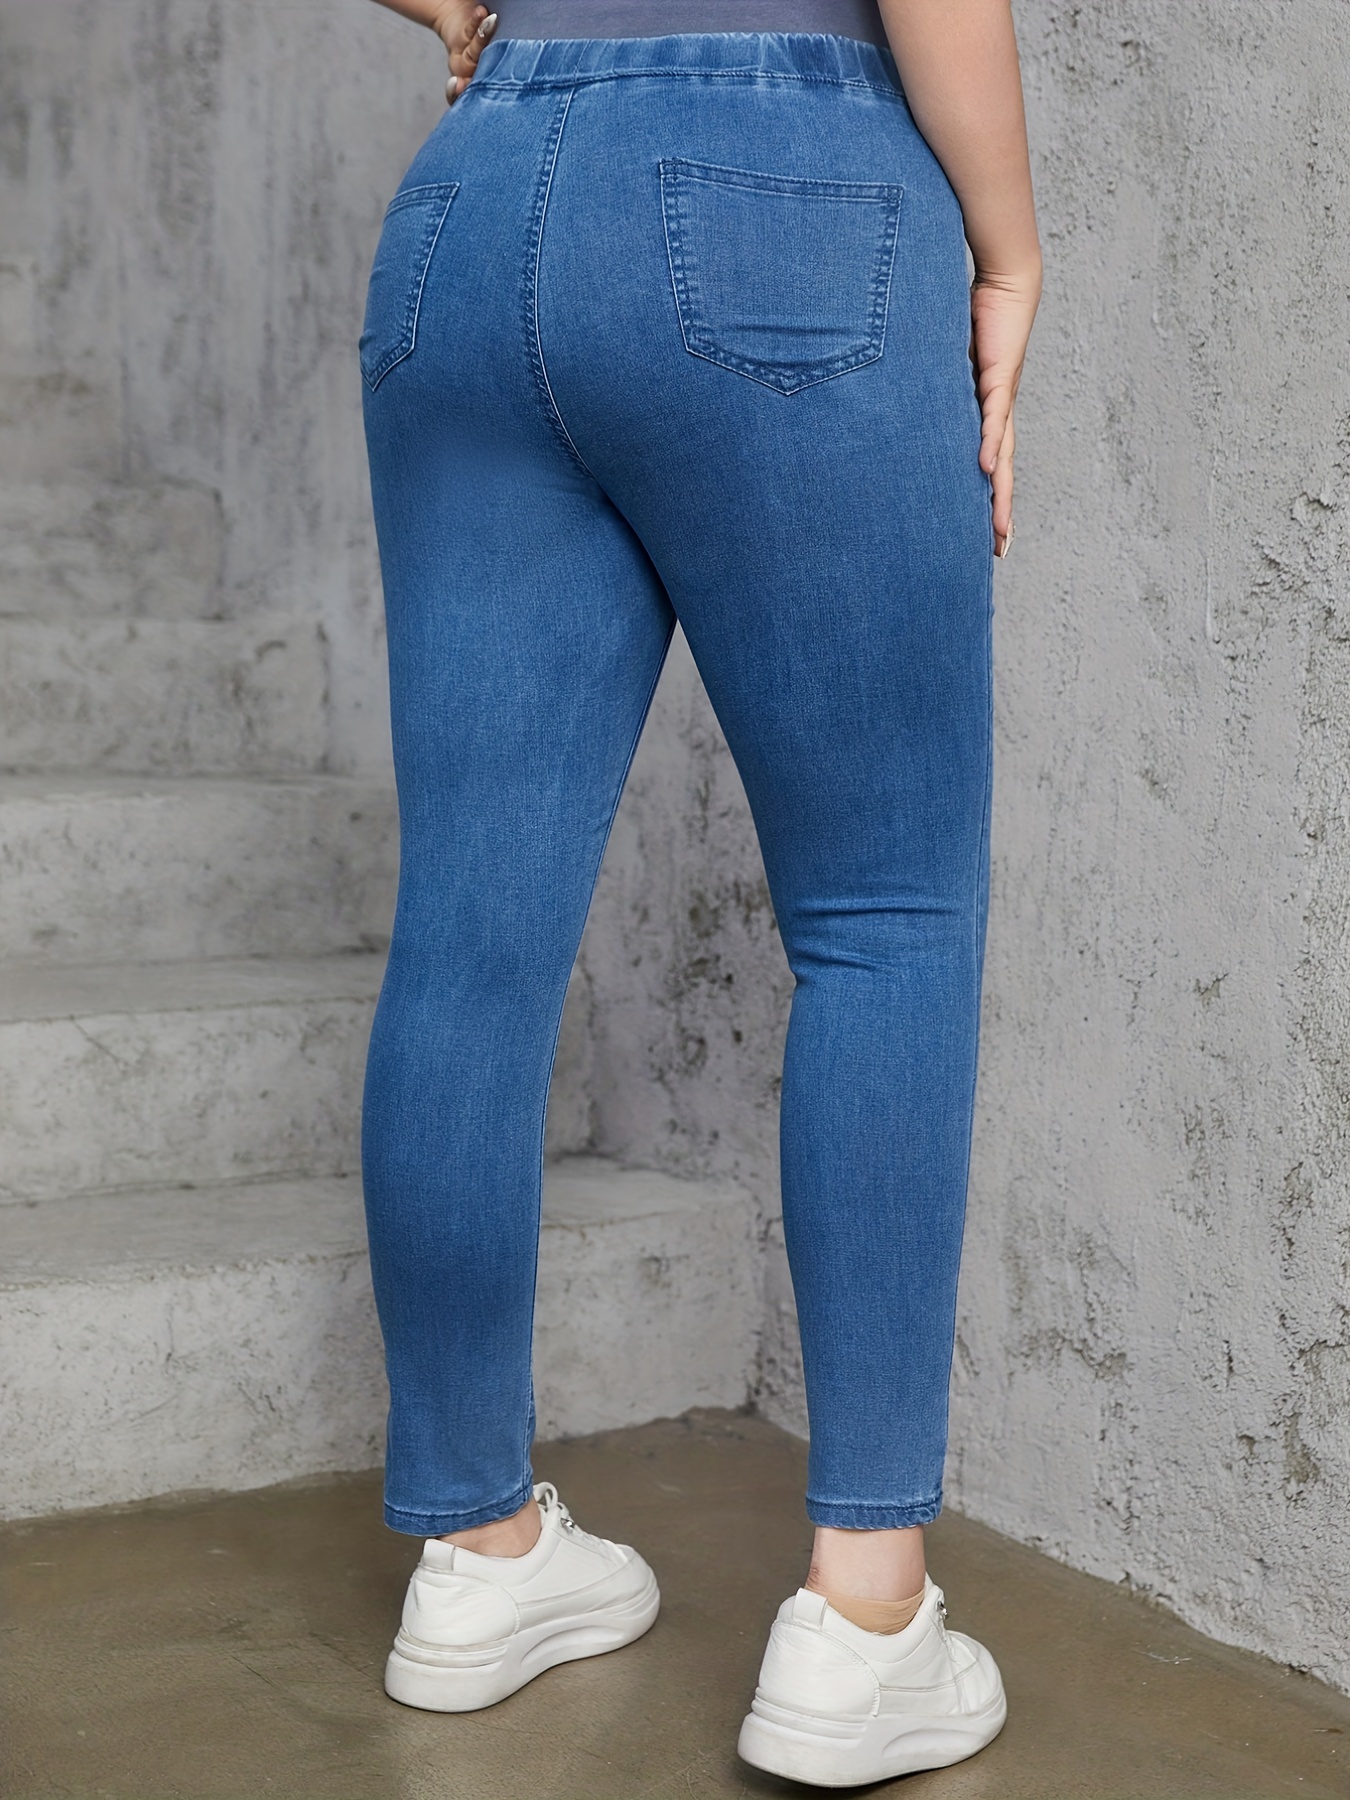 Plus Size Basic Jeans, Women's Plus Elastic Waist Solid High Stretch Skinny  Jeans